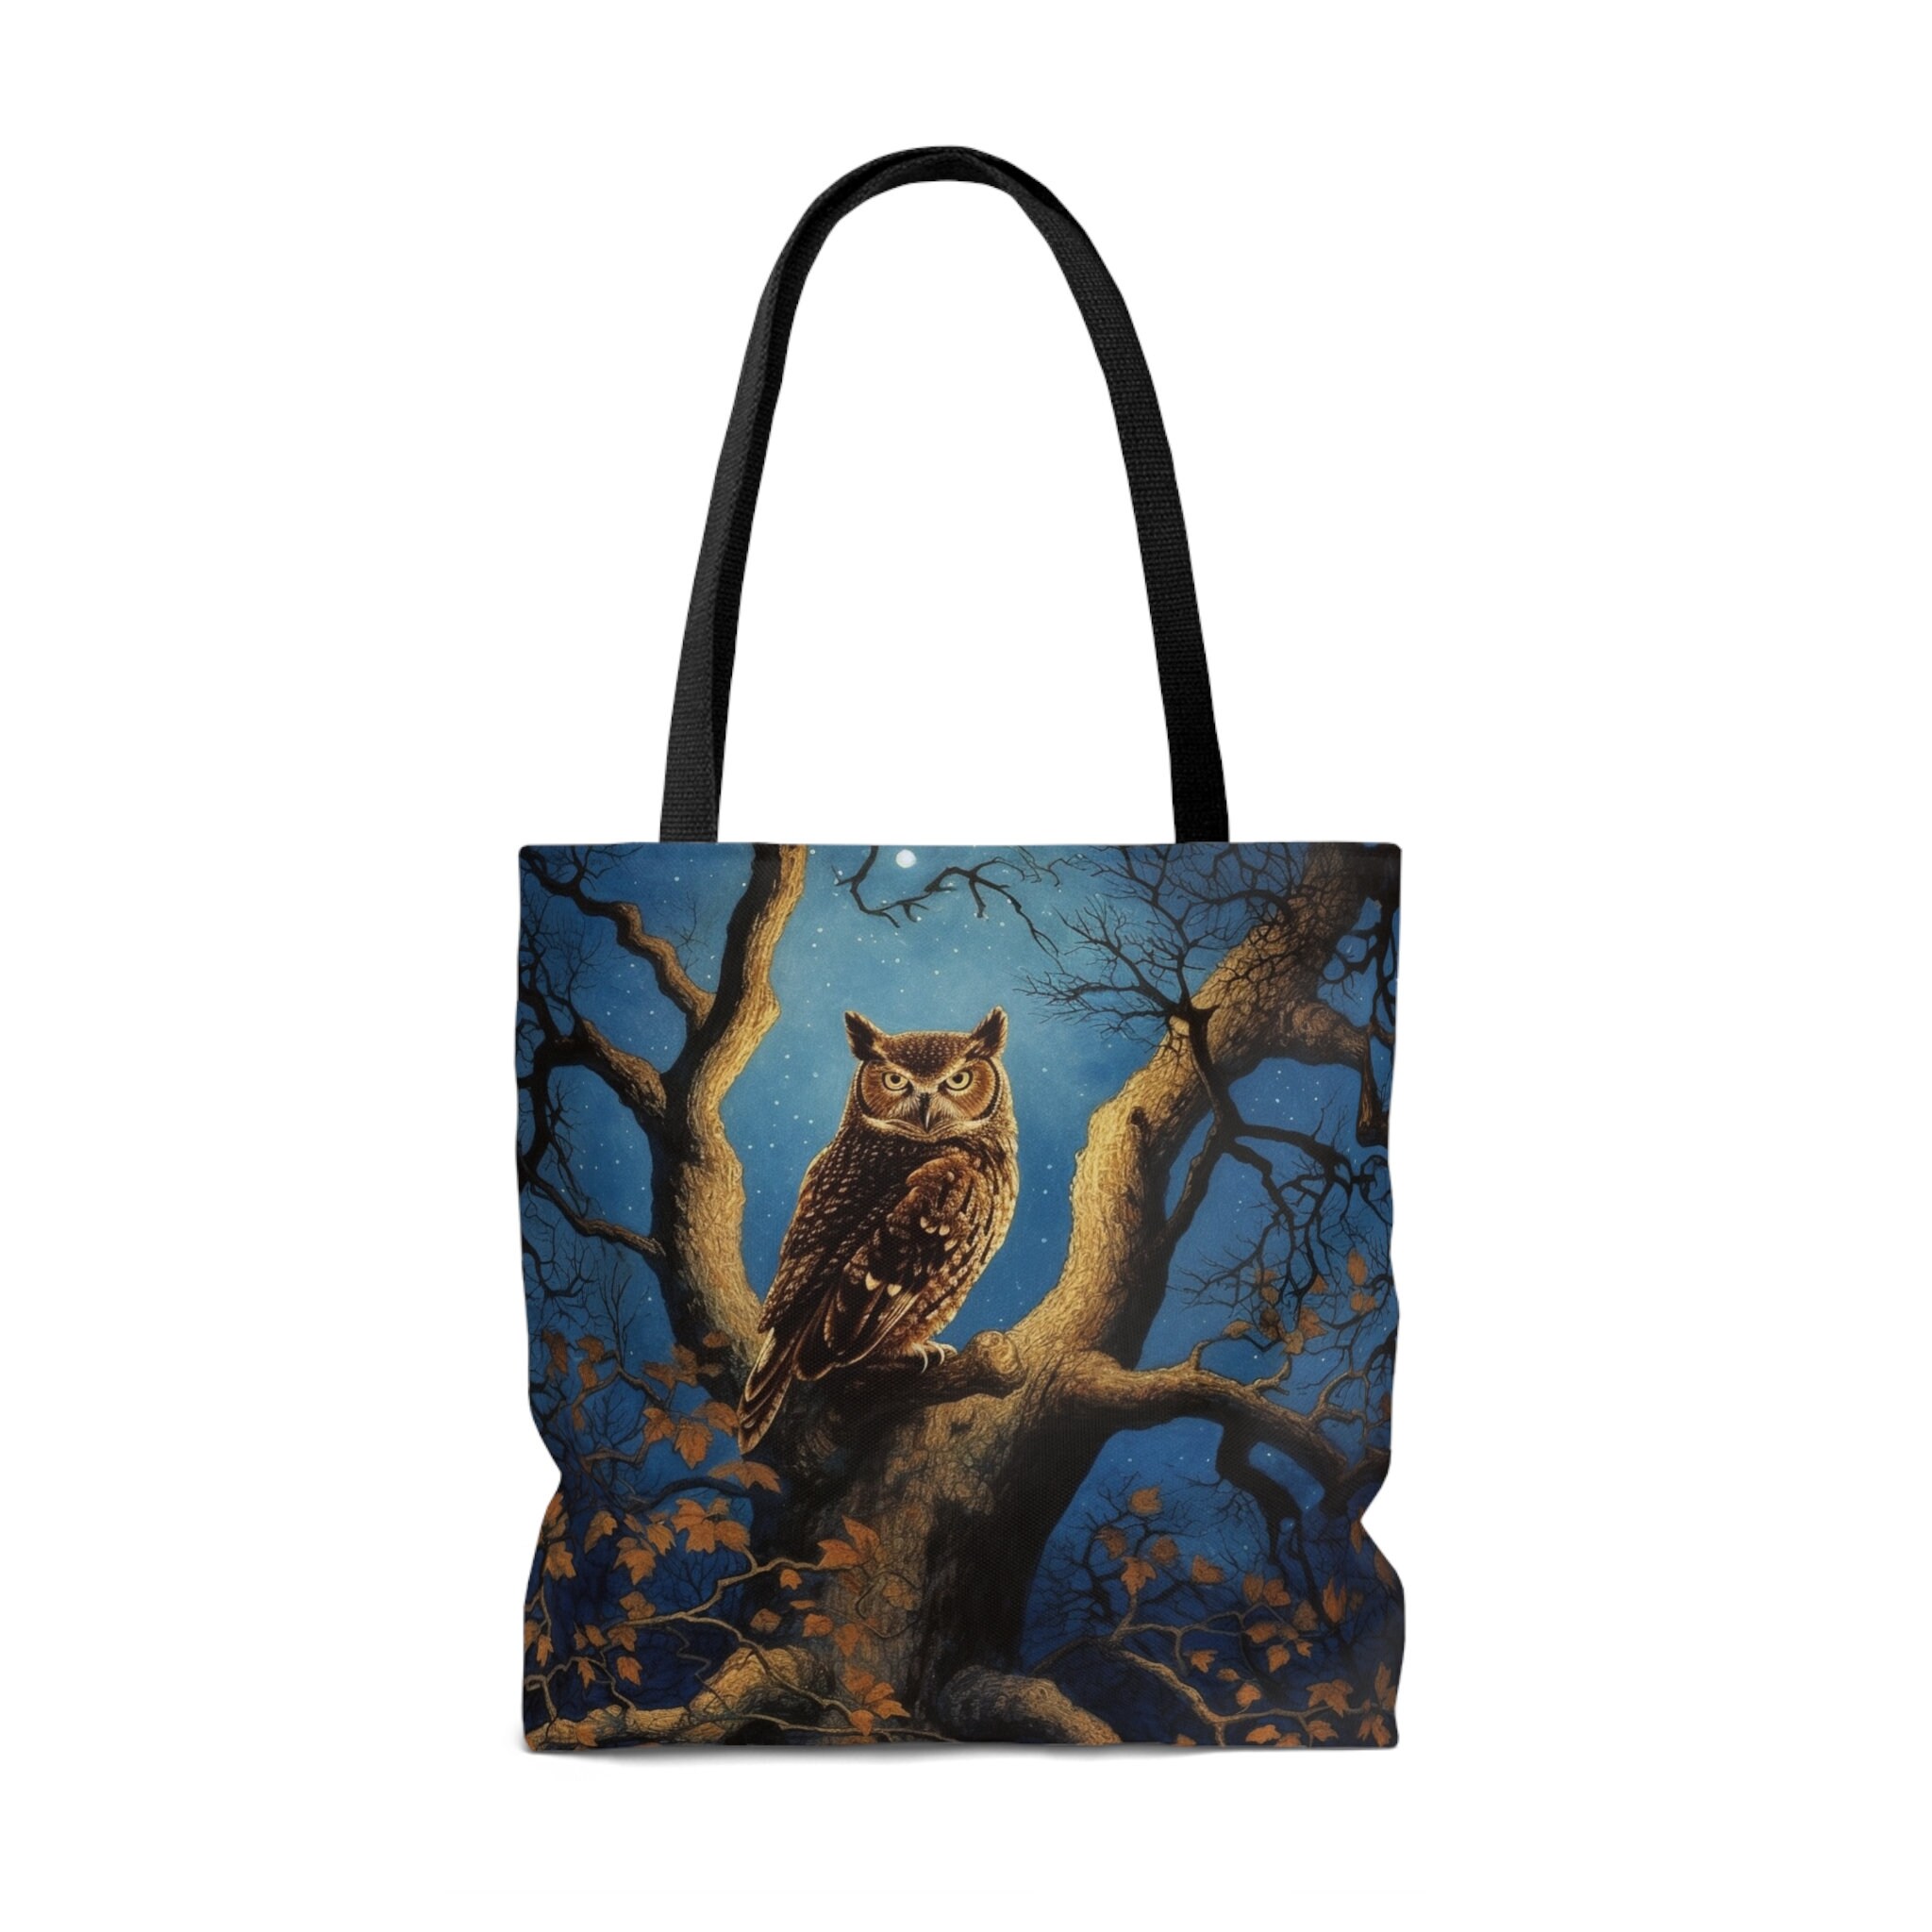 Wise Owl Night Tote Bag Moonlit Tree Design Tranquil Forest - Etsy